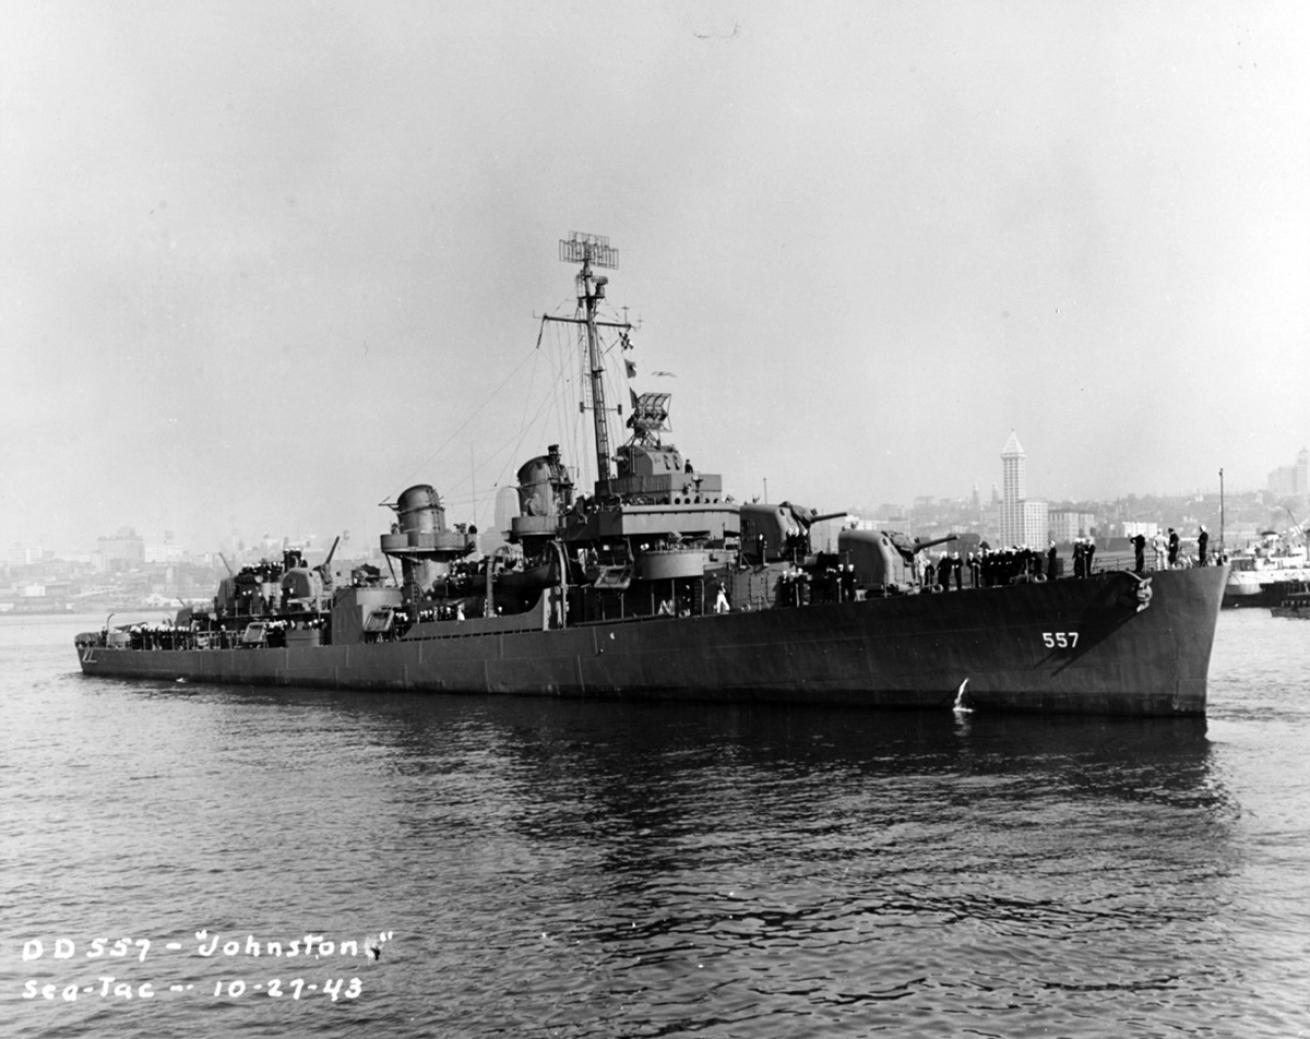 A black and white image of the USS Johnston in a Washington State port before its sinking.